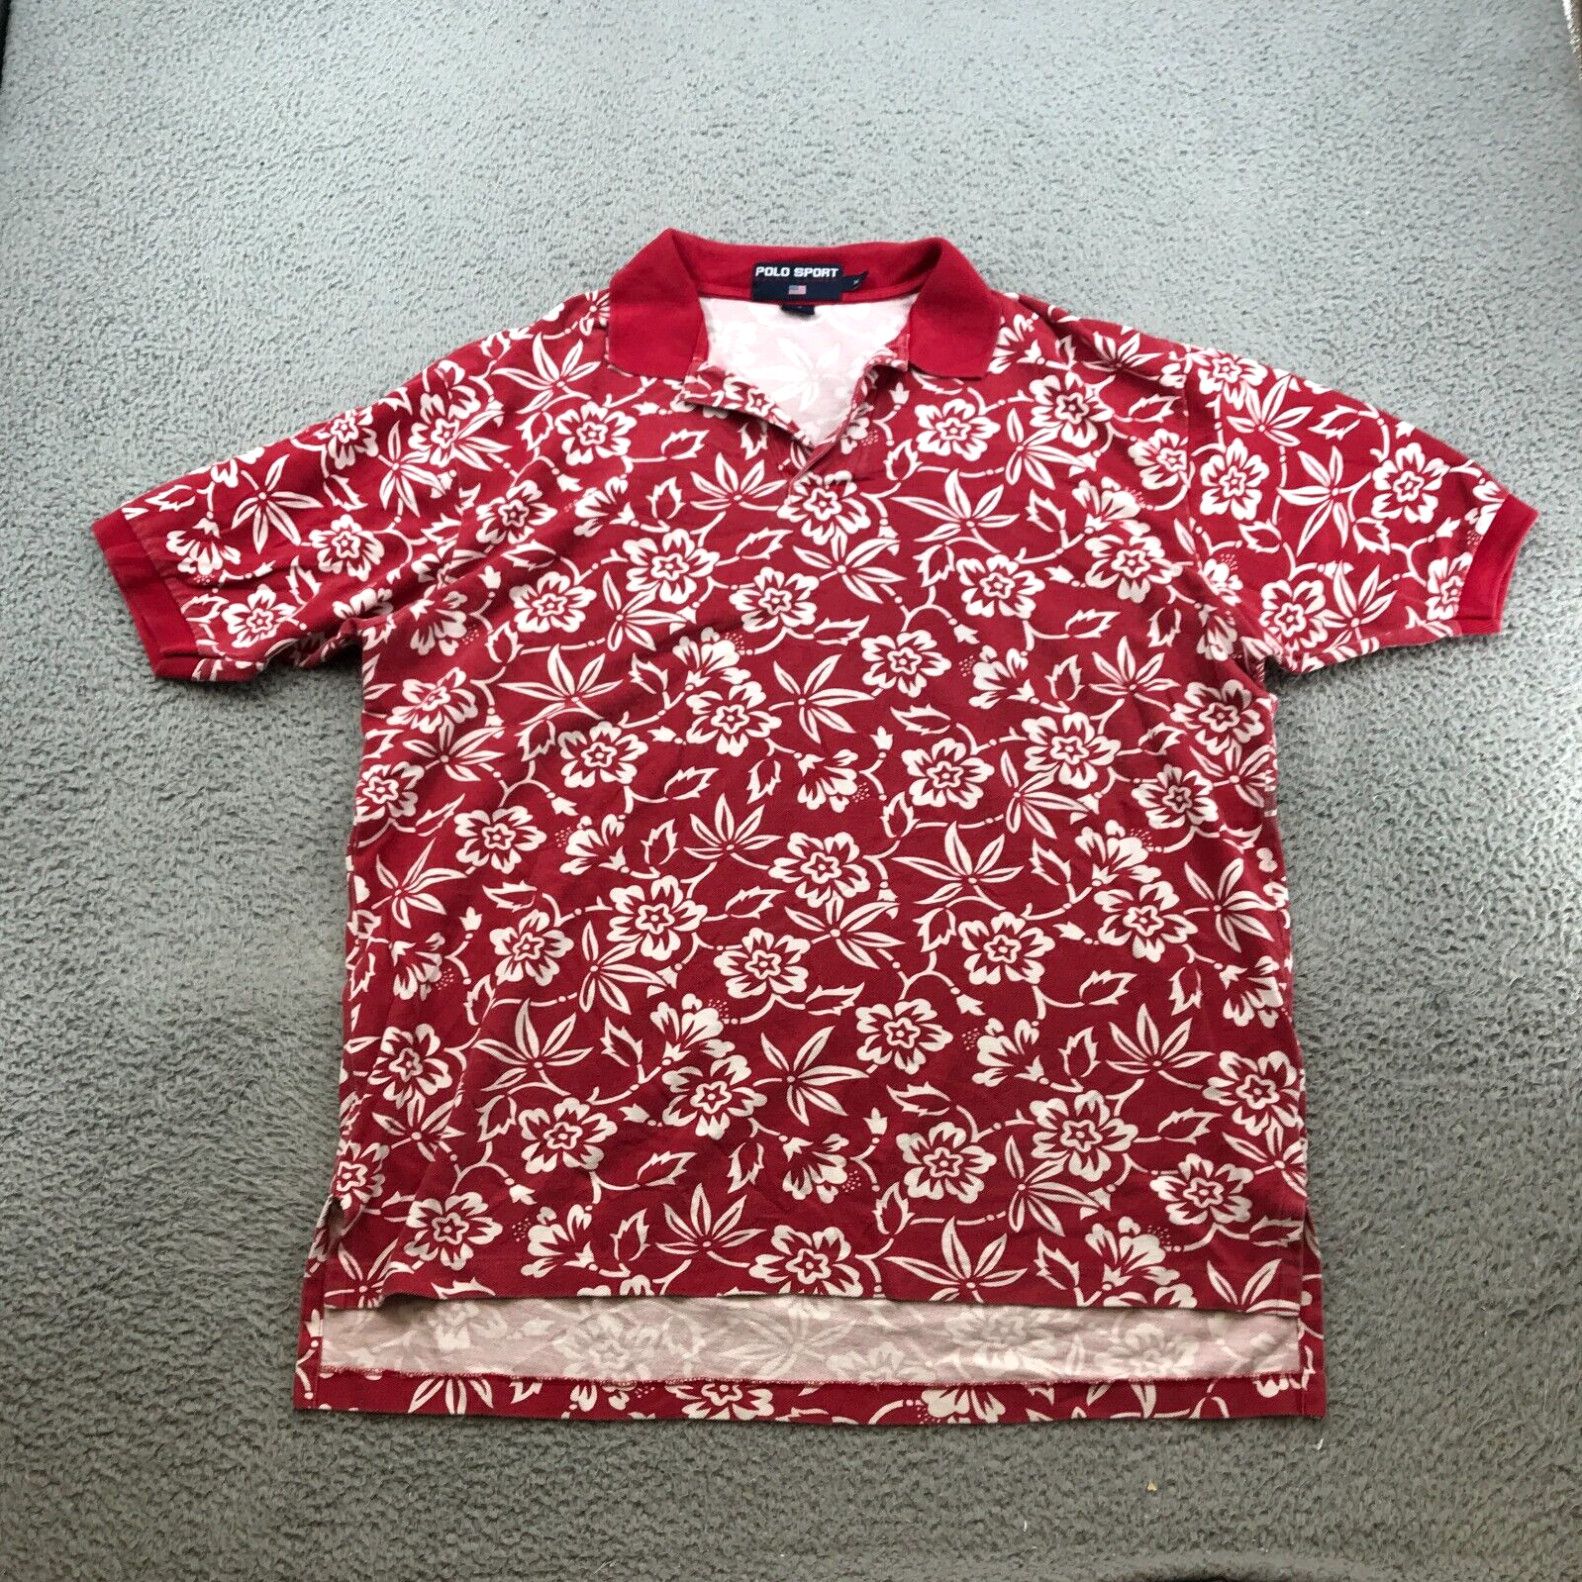 Vintage Vintage Polo Sport Polo Adult XL Red Tropical Hawaiian Short Sleeve 47229 Size US XL / EU 56 / 4 - 1 Preview